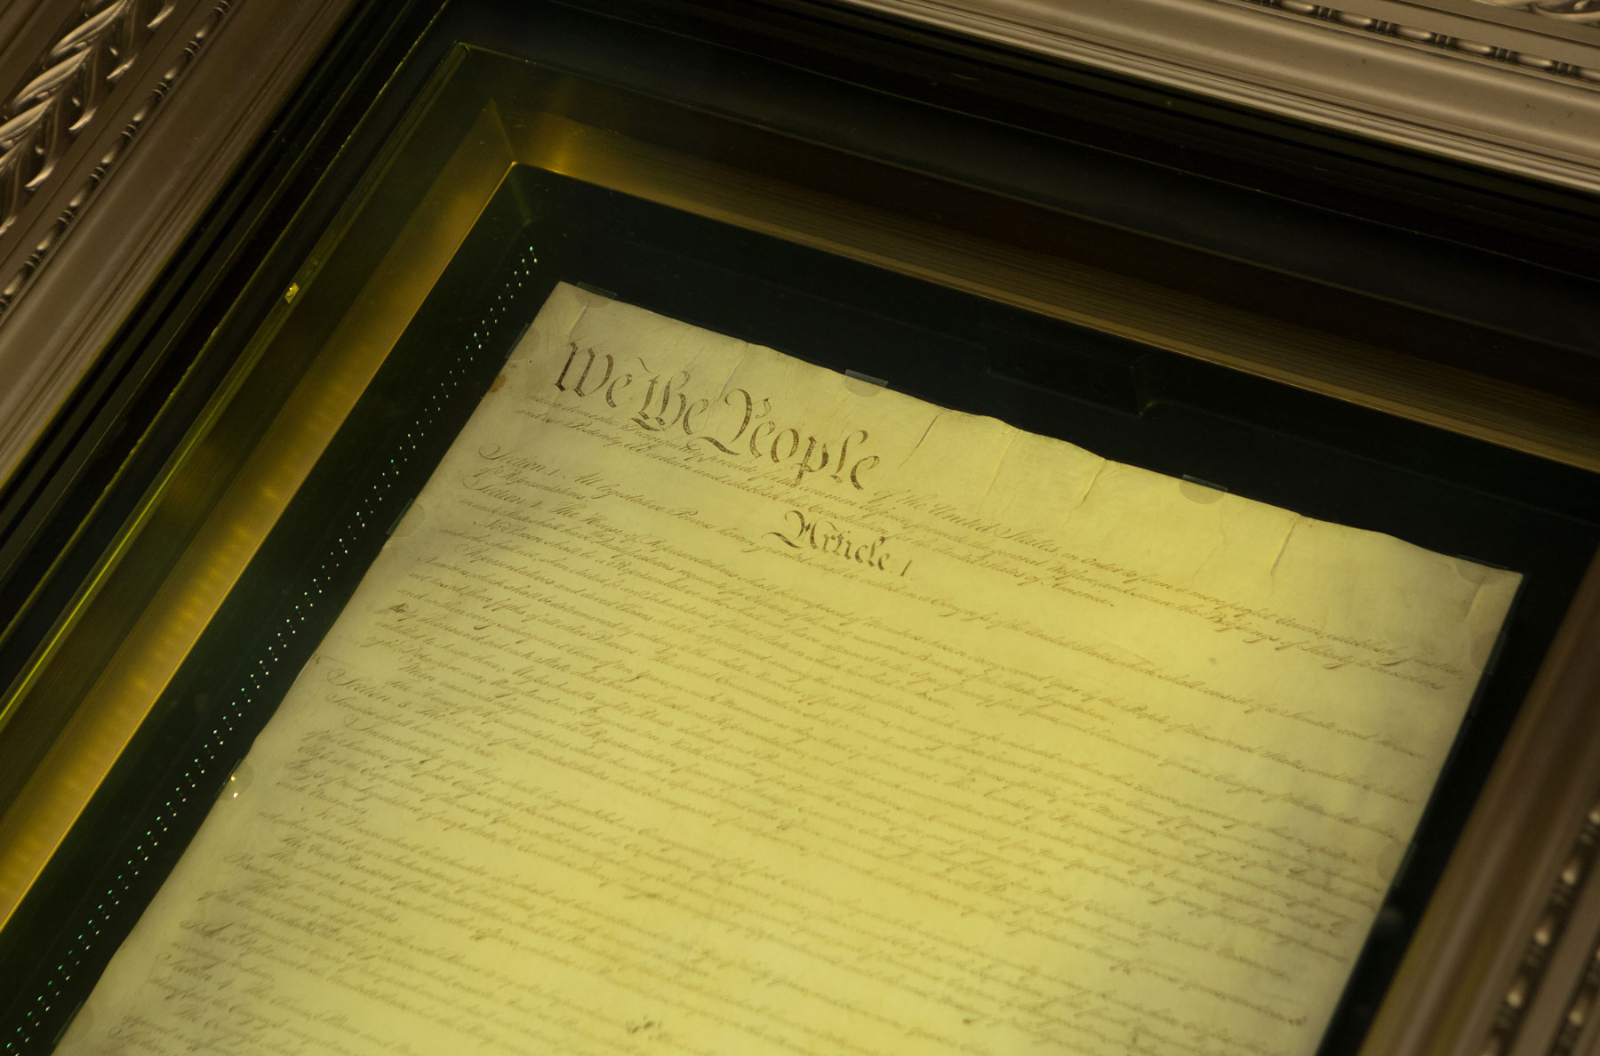 A document is housed in an ornate gold frame and covered with glass.It reads, "We the people..."